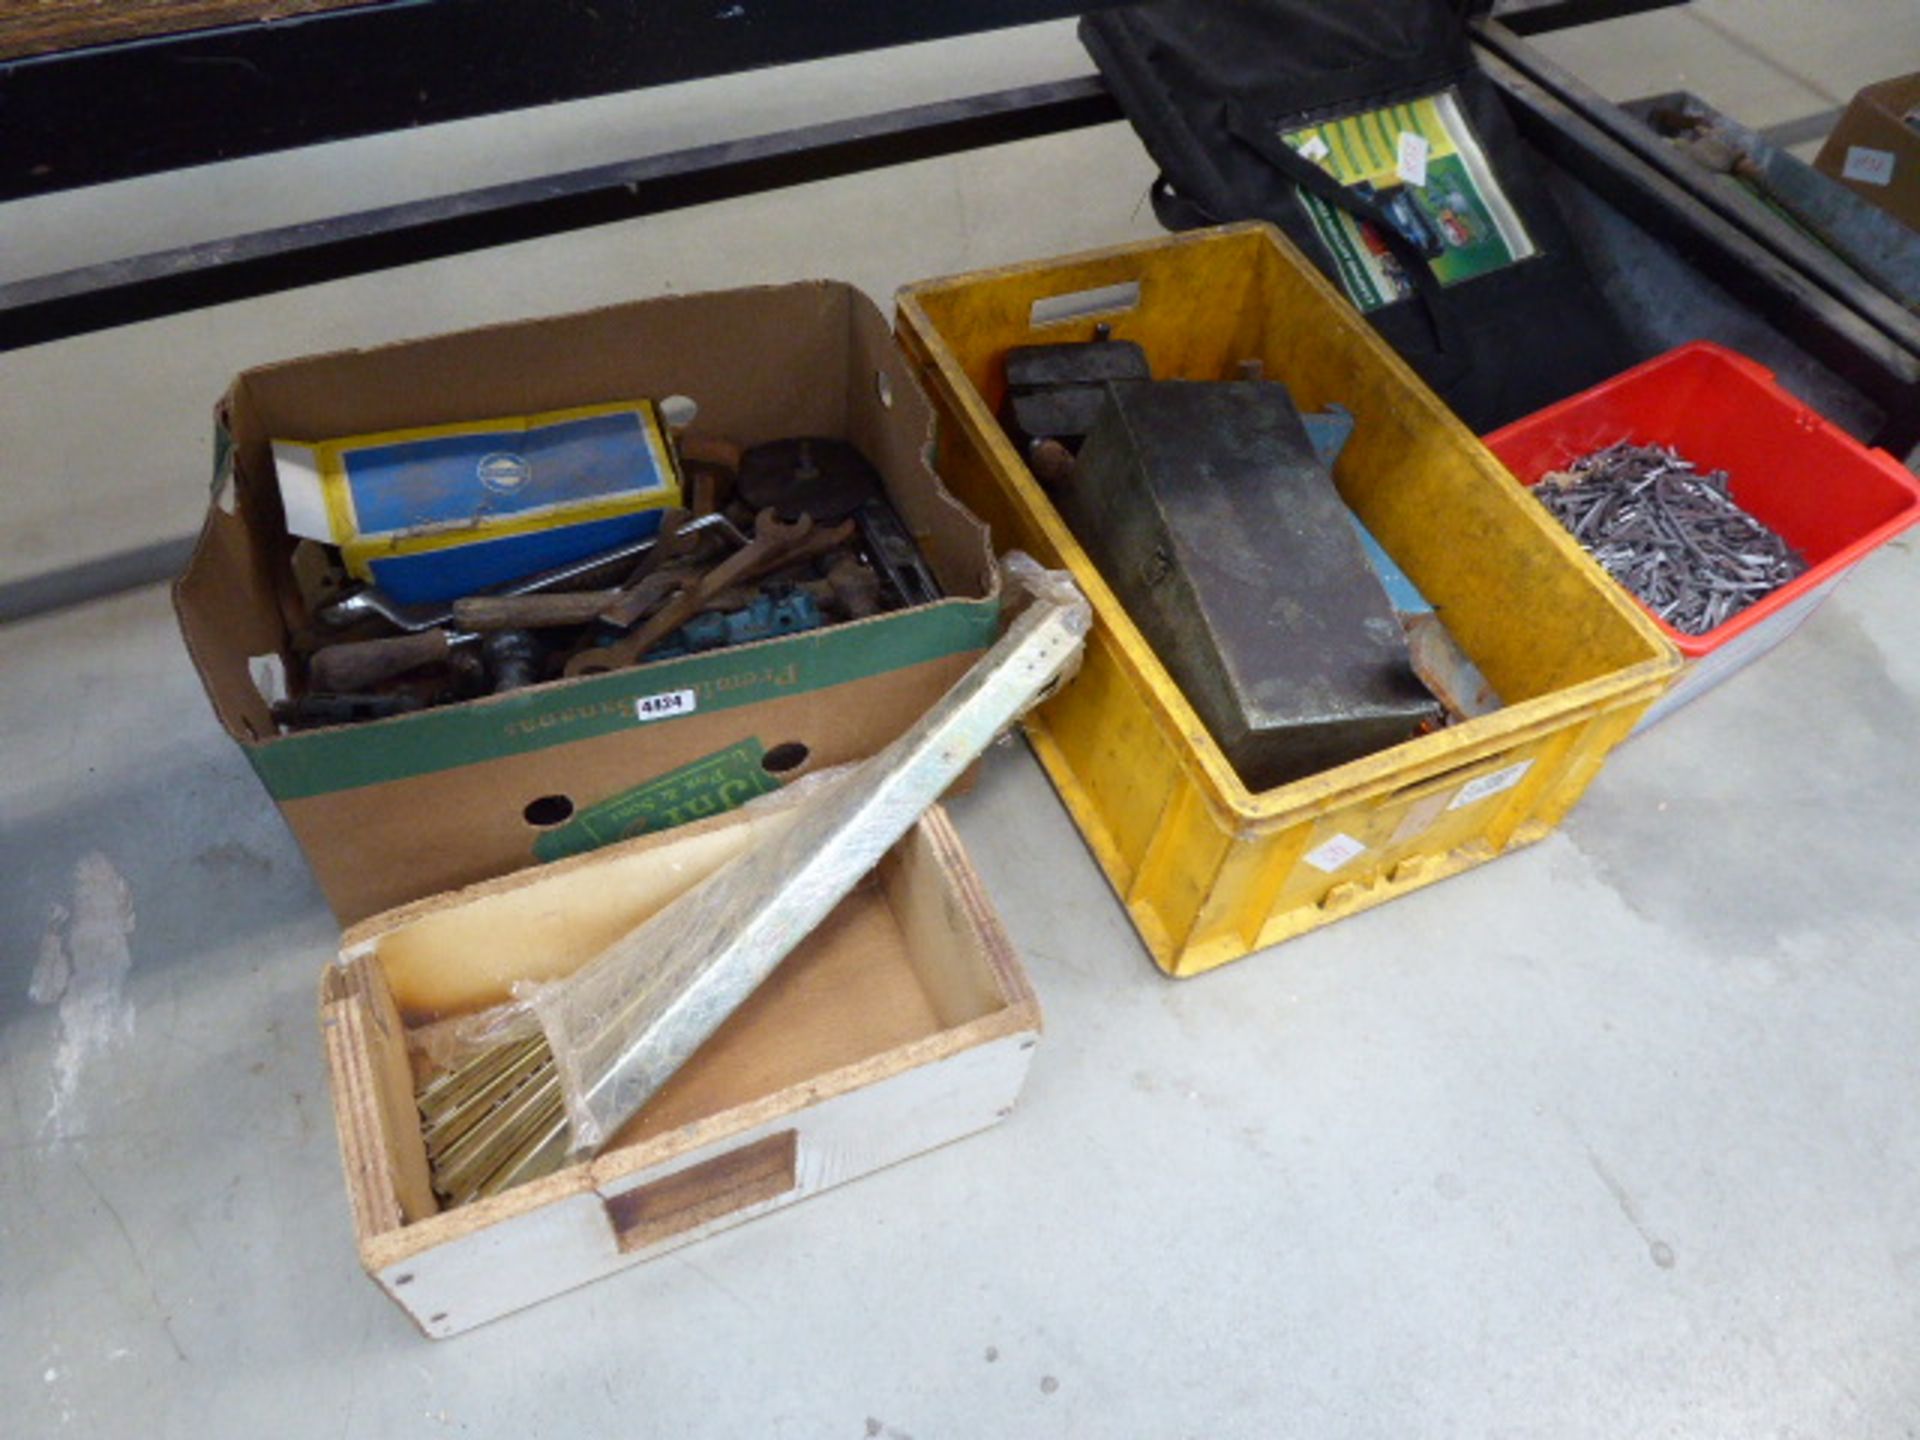 Large underbay of assorted tools and nails